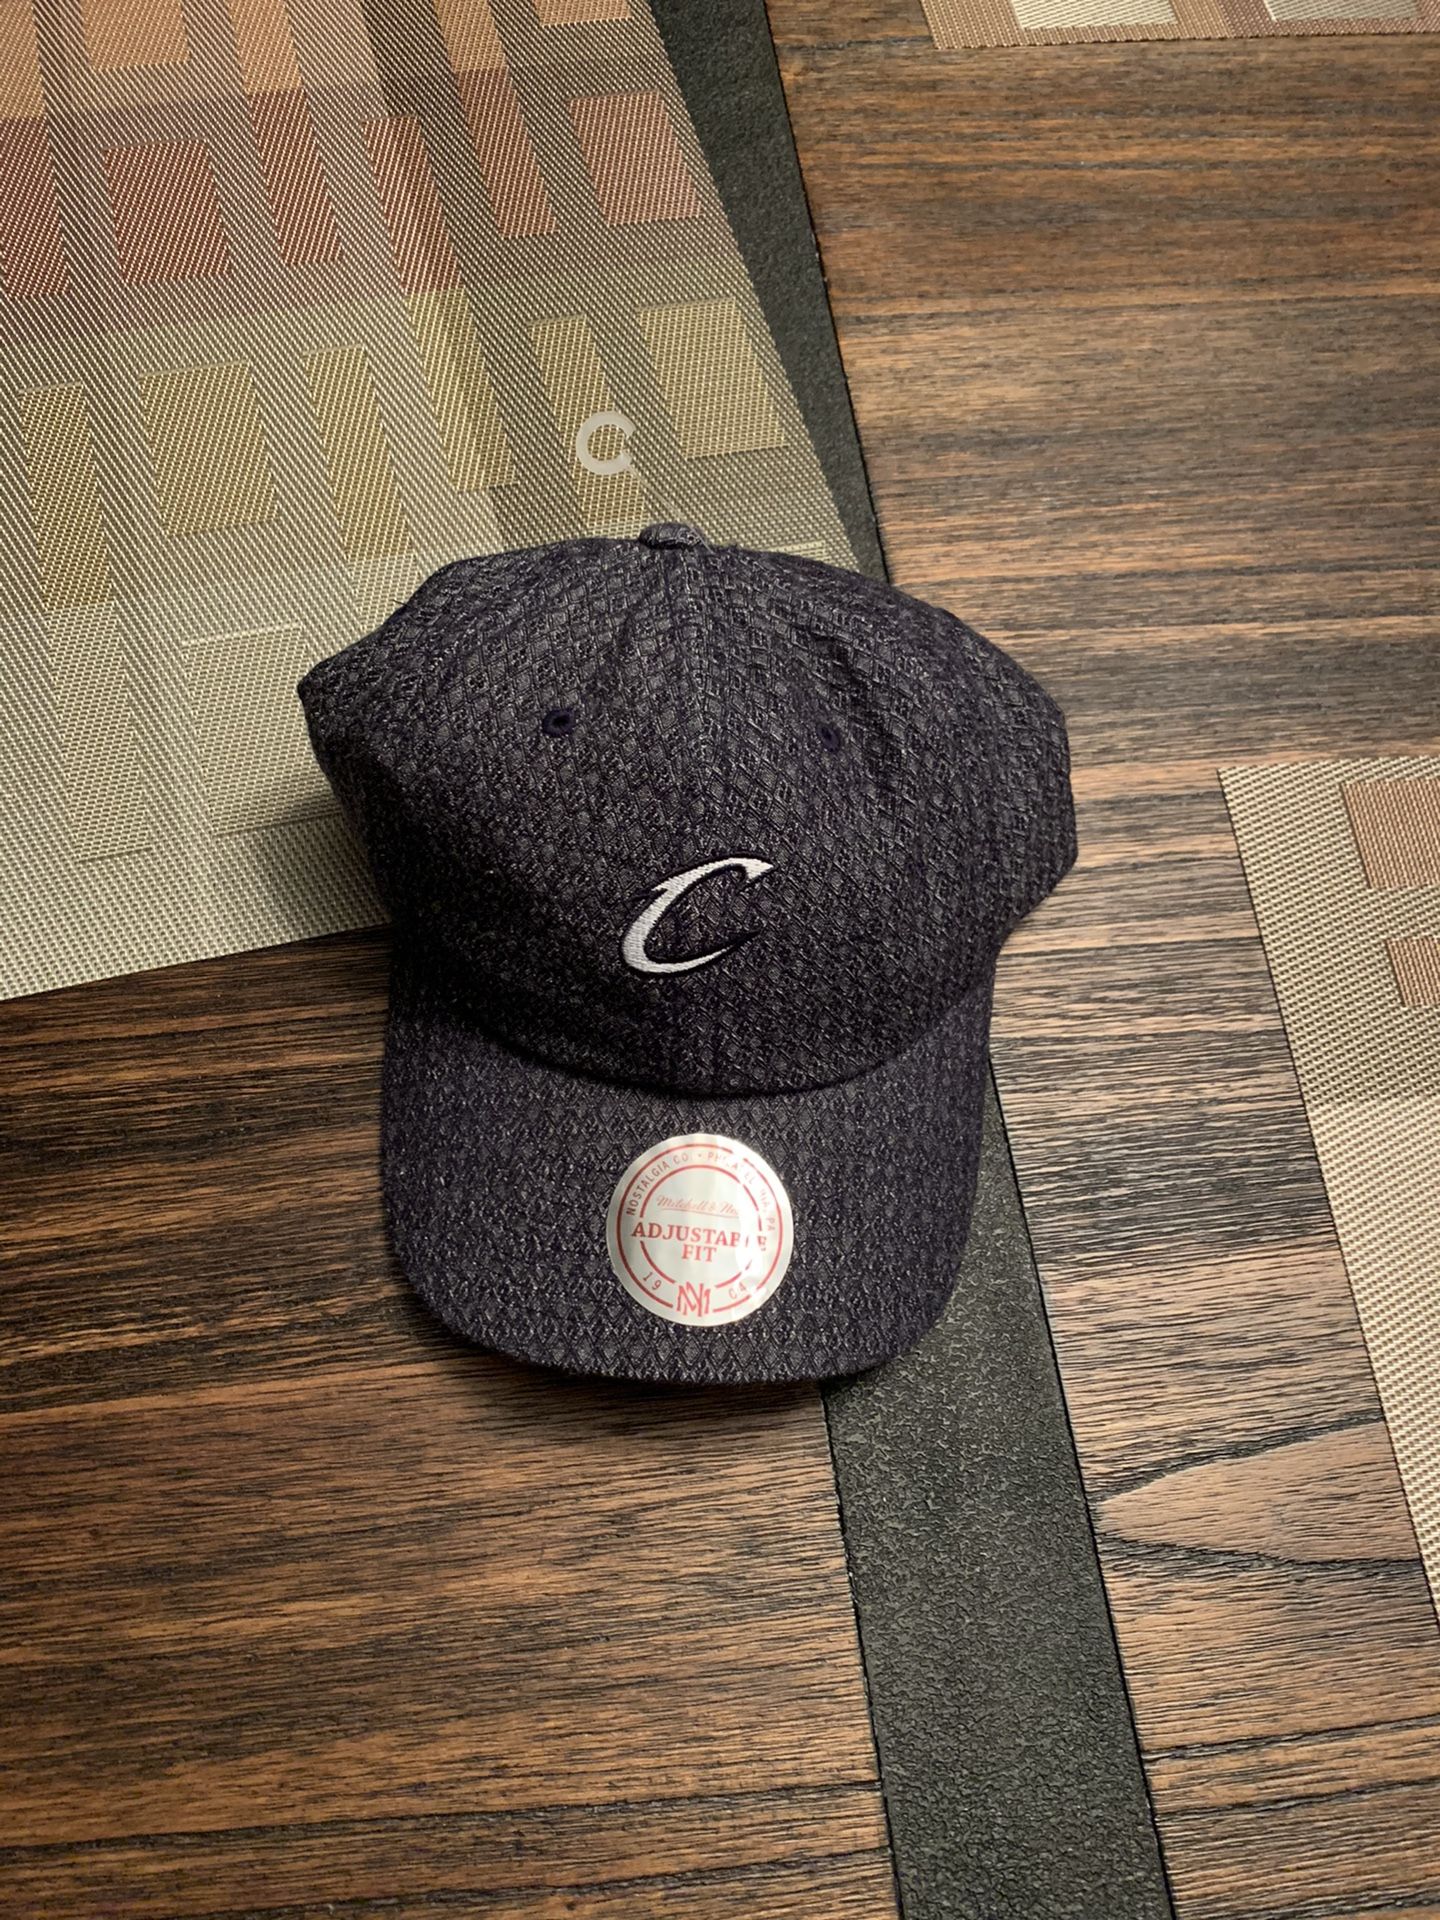 Brand new Cleveland Cavaliers hat